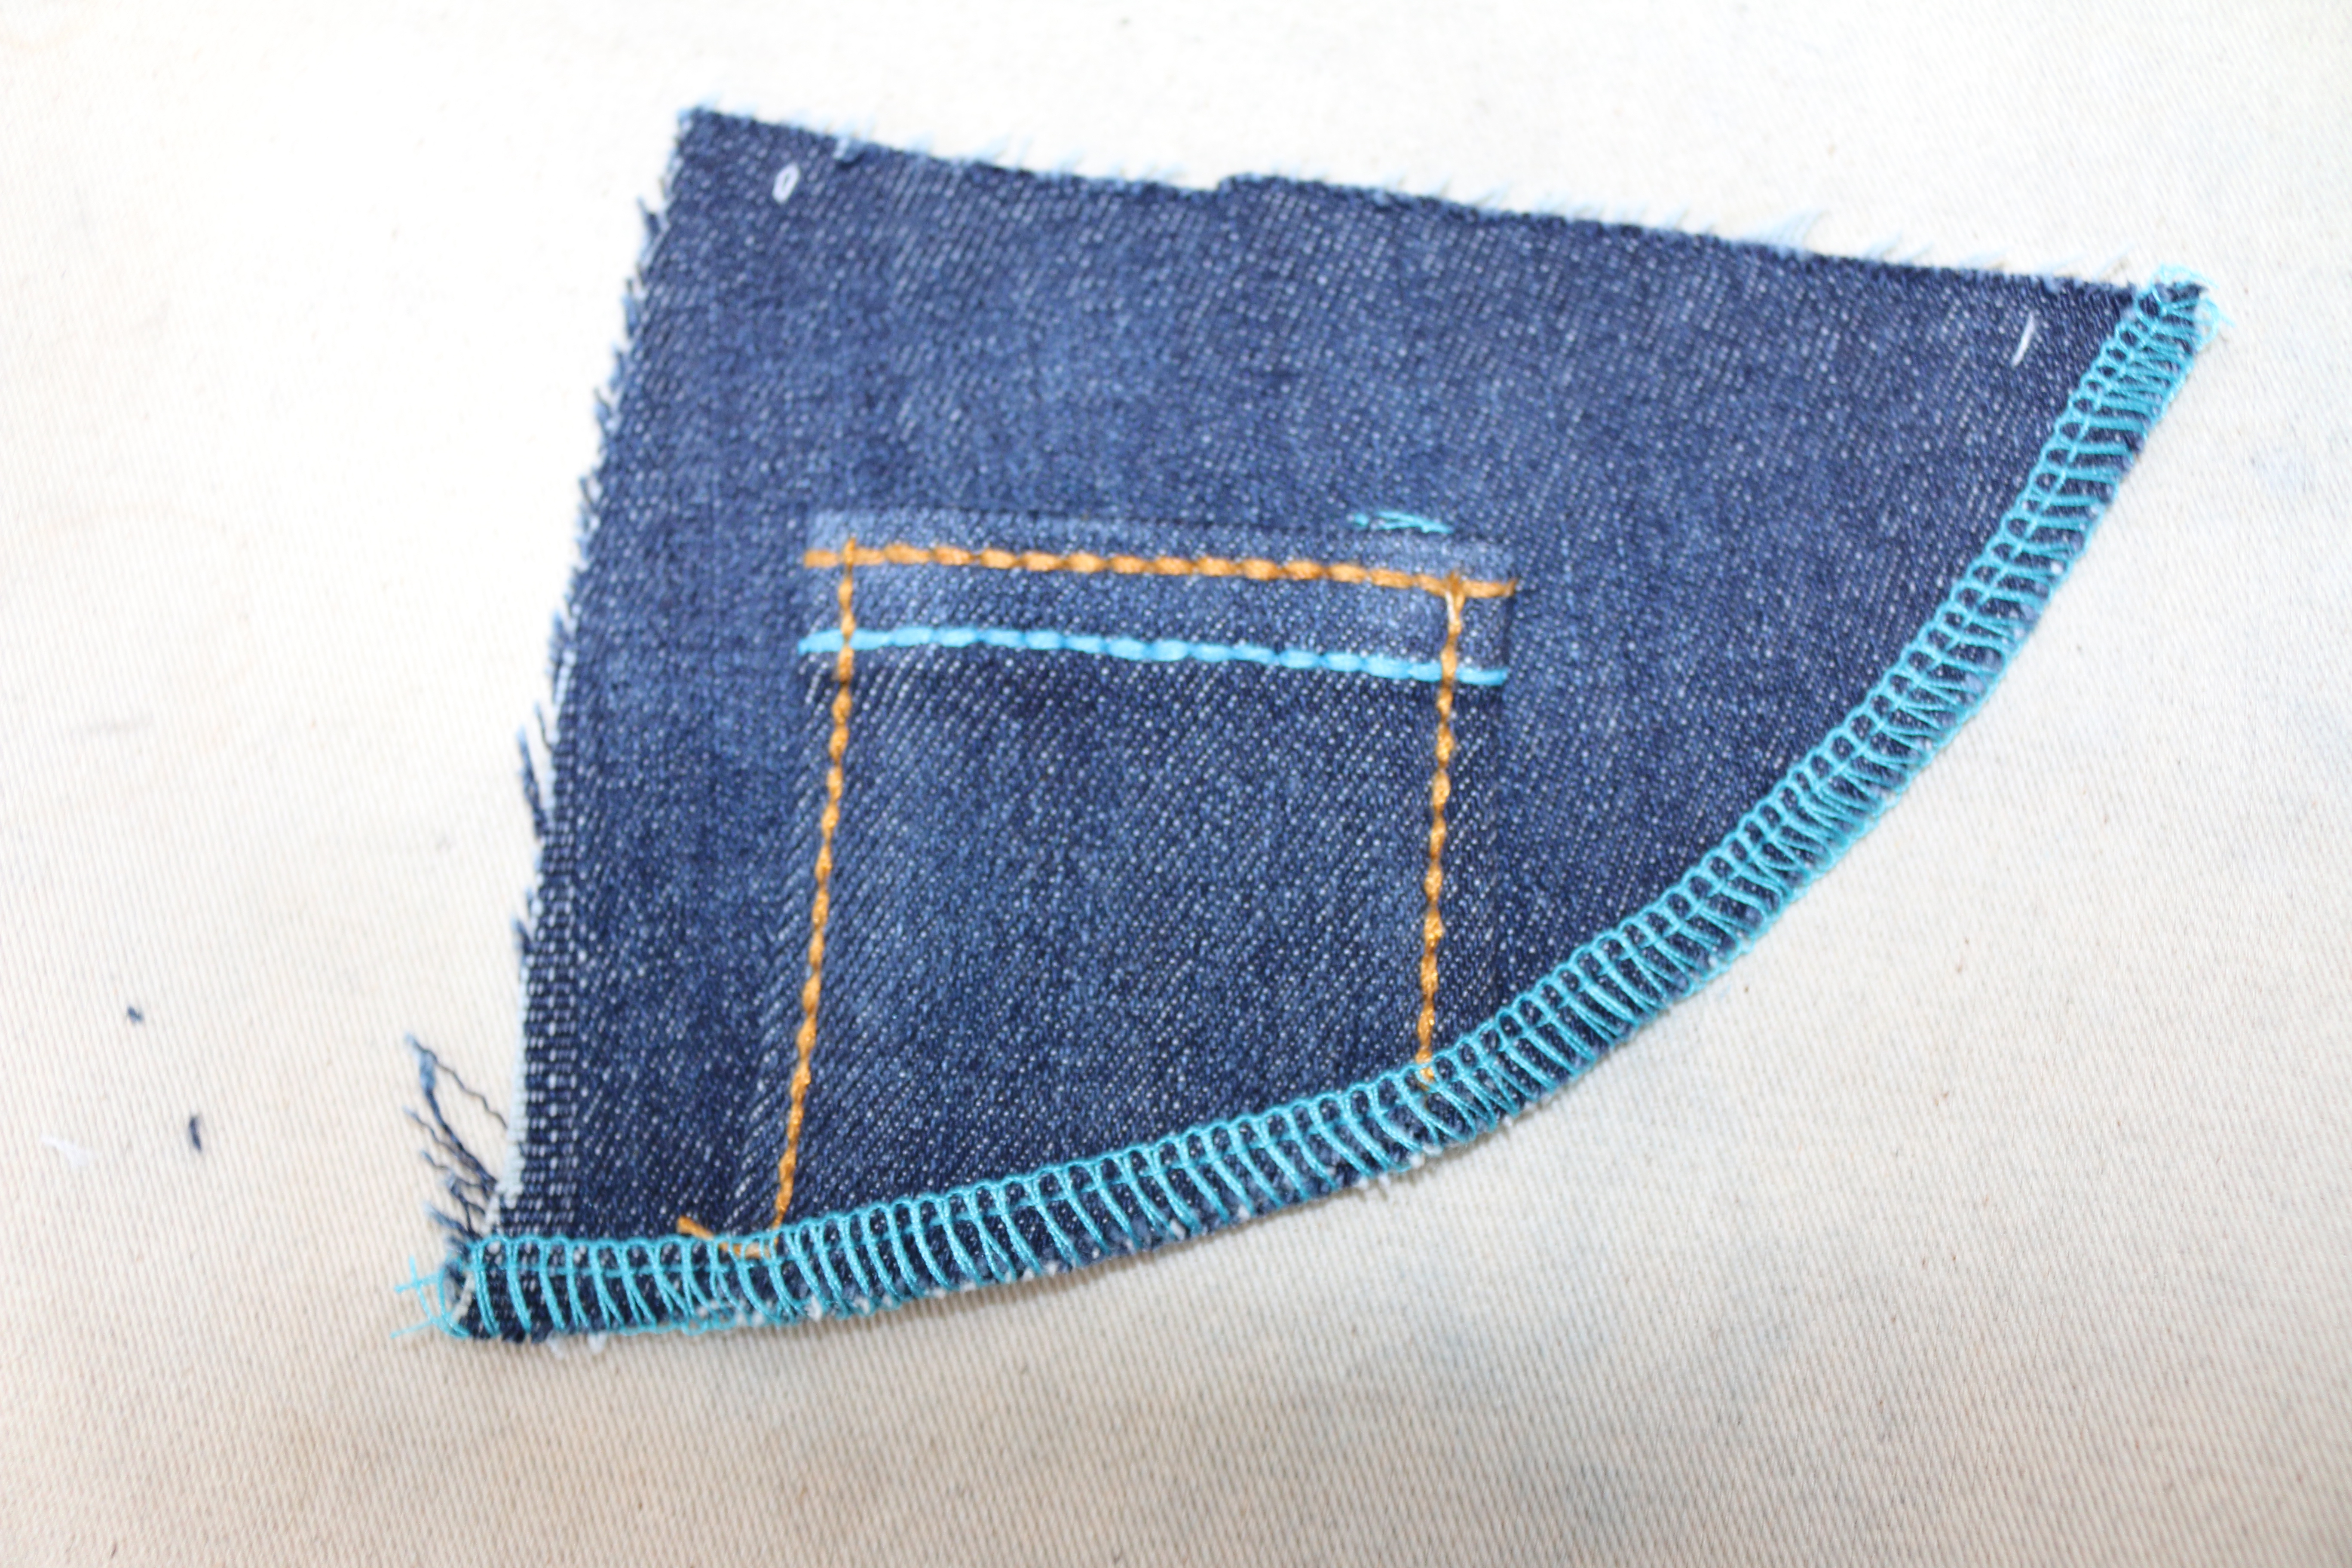 denim thread  Sewing with Scooby Snacks